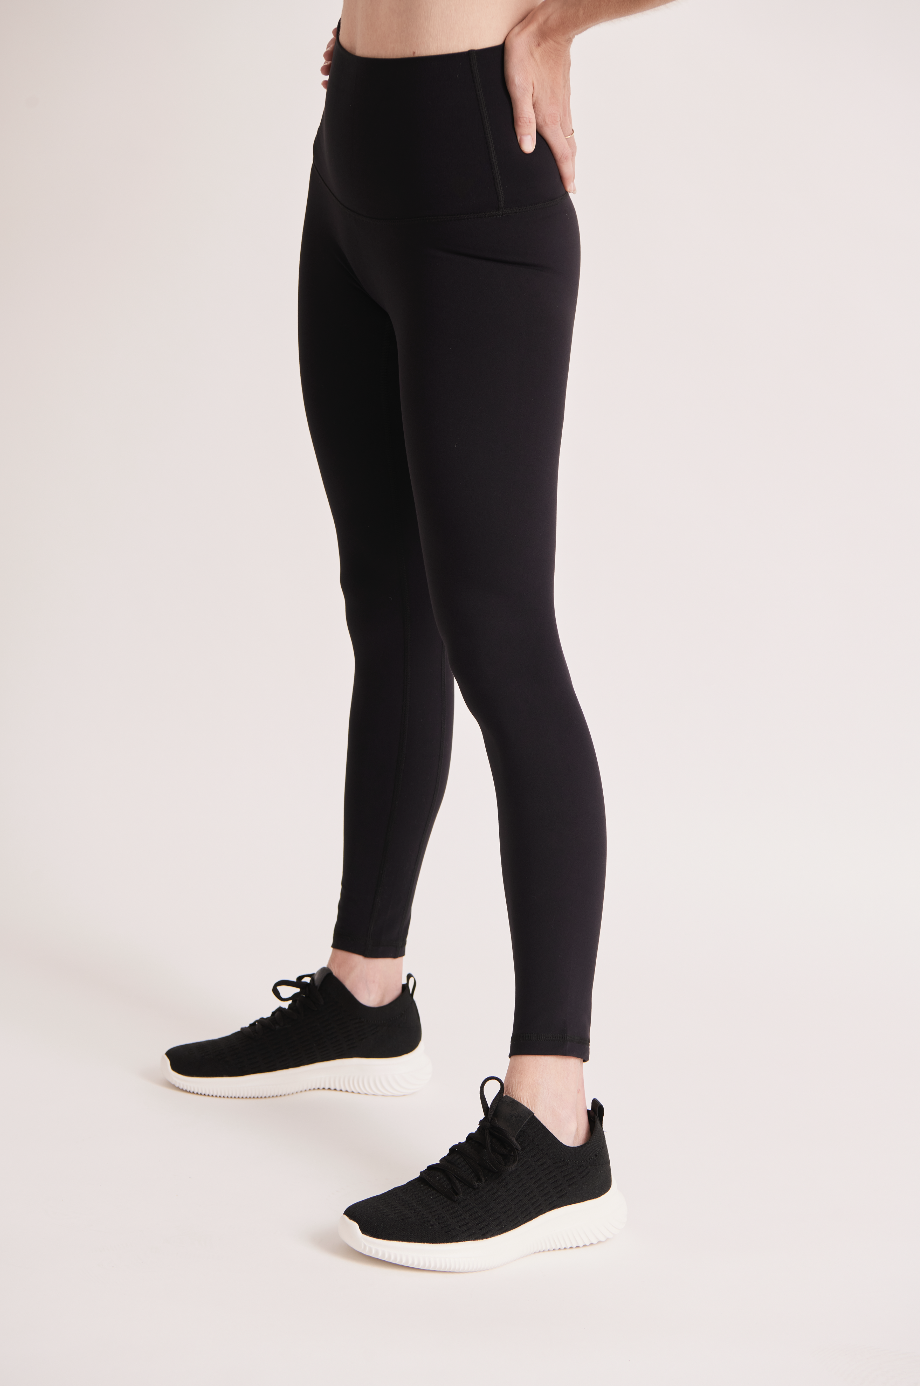 Collega Port tieners High Rise Sculpt Tight | High Waisted Leggings | Super High Waisted Tights  – Baise Active